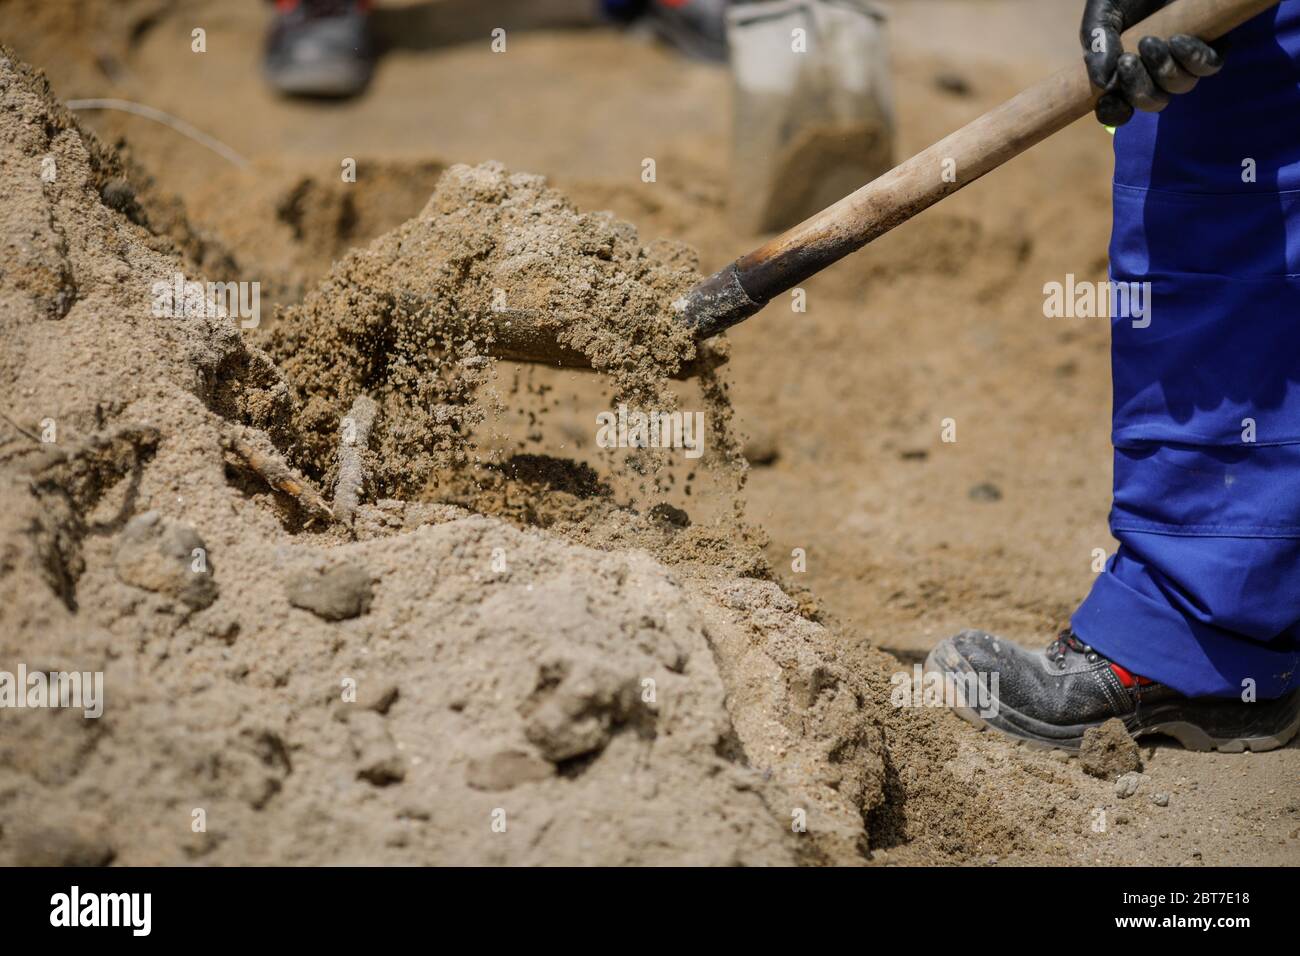 Details with a construction worker using a shovel to load sand in a wheelbarrow. Stock Photo